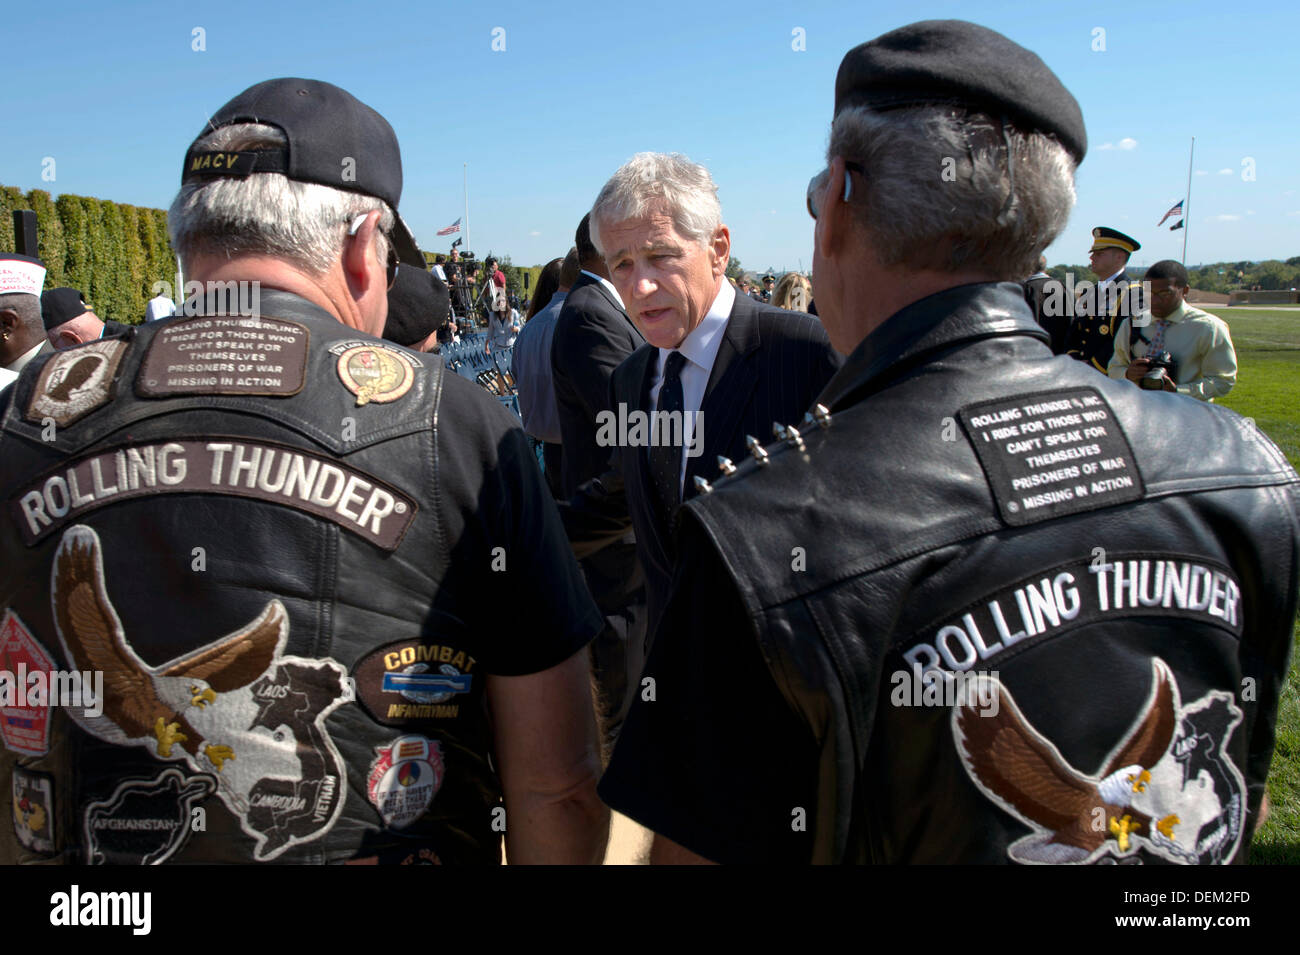 US Secretary of Defense Chuck Hagel greets members of Rolling Thunder, a motorcycle club that is involved with POW/MIA organizations after a ceremony to remember prisoners of war and military members missing in action at the Pentagon September 20, 2013 in Arlington, VA. Stock Photo